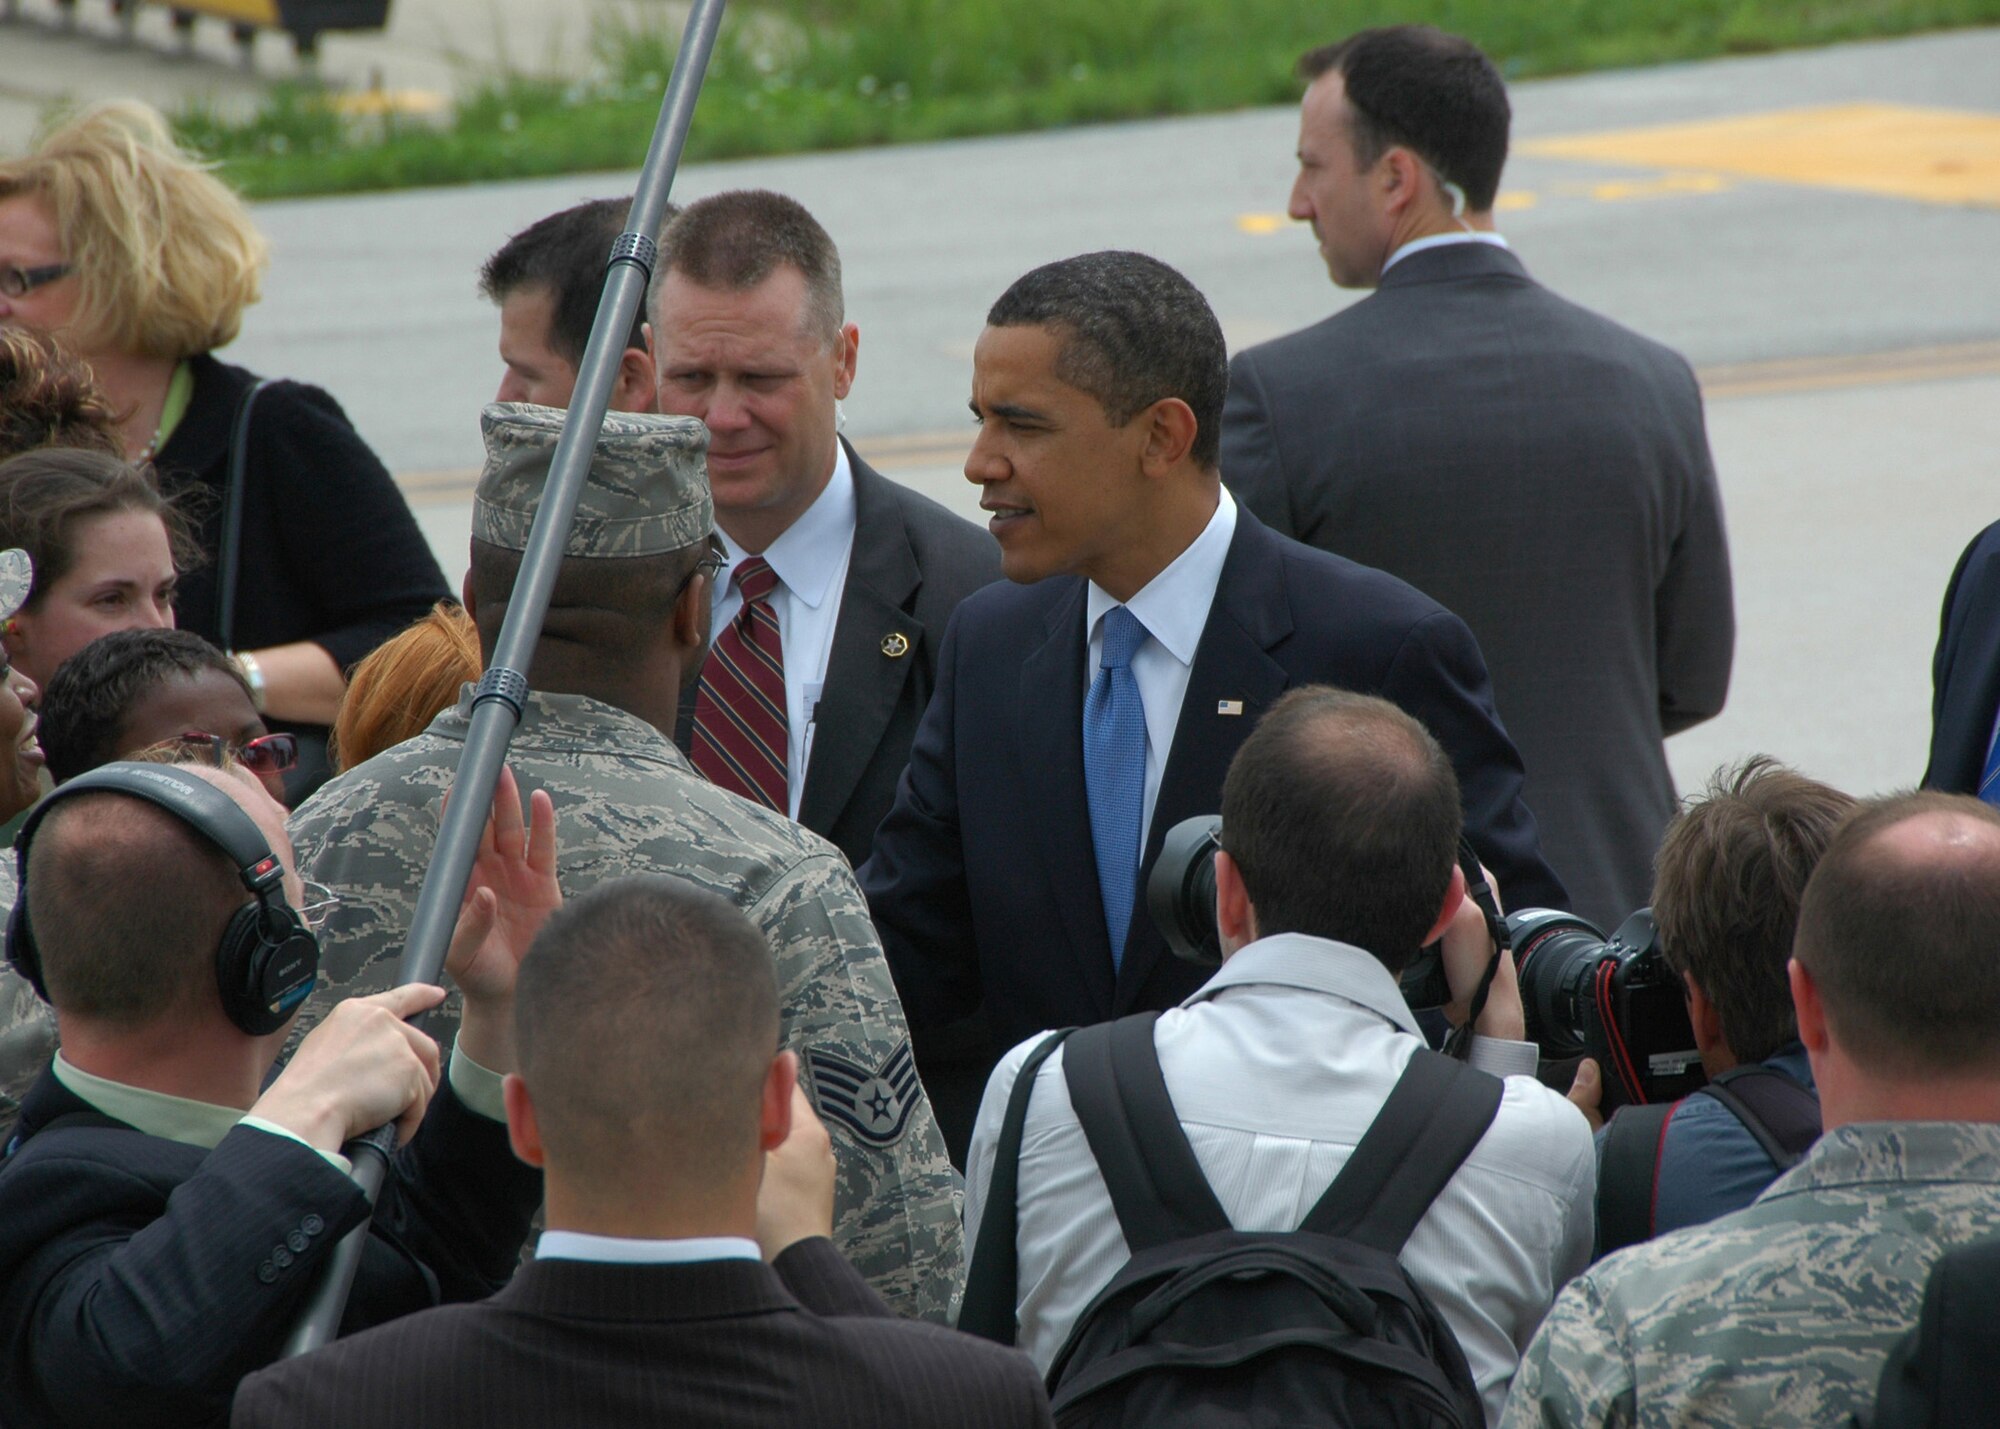 While the media looks on, President Barack Obama greets members of the 131st Fighter Wing, Missouri Air National Guard, at Lambert-Saint Louis International Airport prior to his departure on Air Force One April 29.  President Obama marked his 100th day in office with a Town Hall Meeting in Arnold, a surburb of Saint Louis, earlier that day. (U.S. Air Force Photo by Master Sergeant Mary-Dale Amison)  (RELEASED)